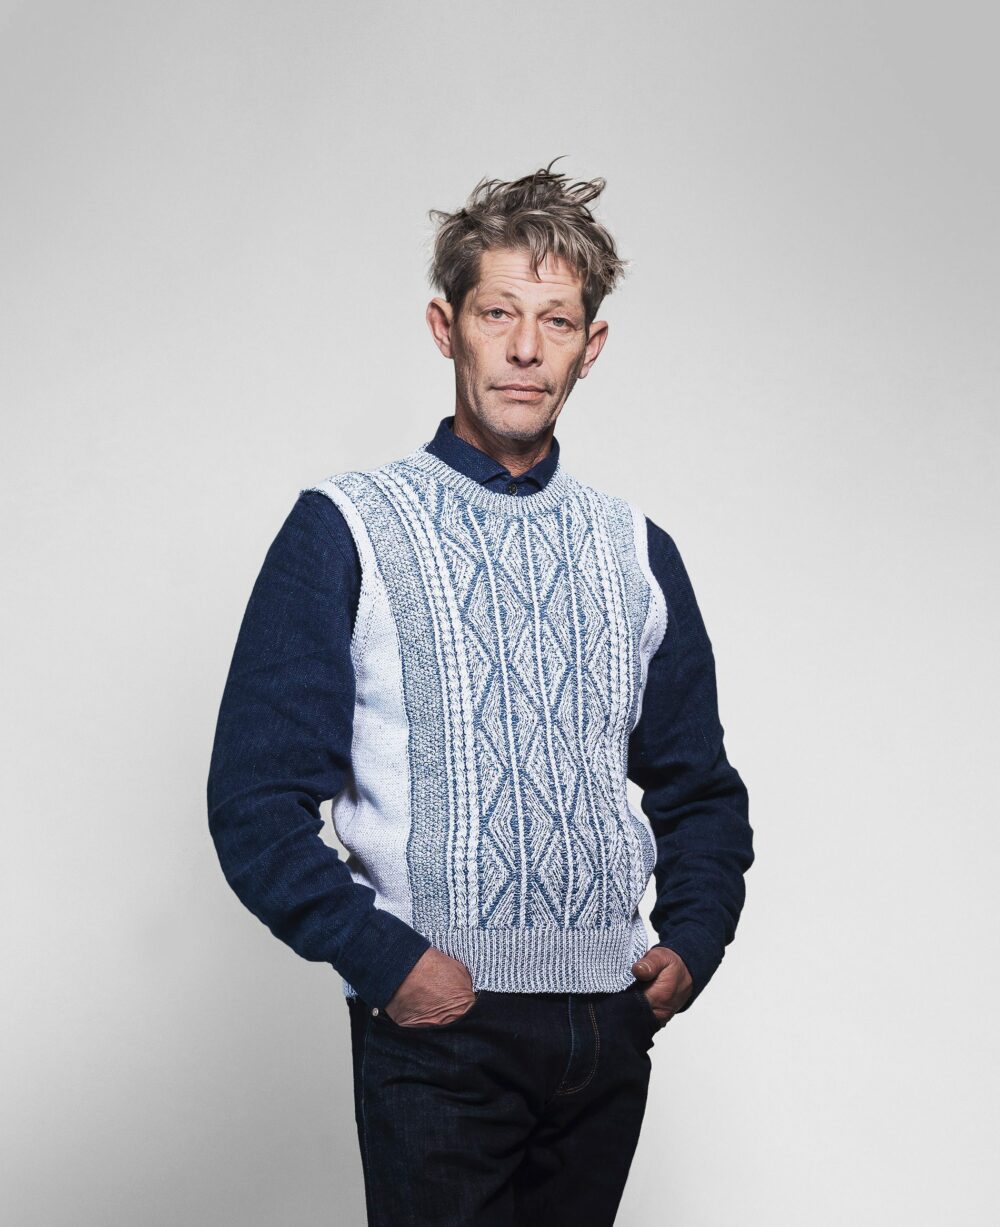 Patented Aran Crew Neck Vest by Inis Meáin